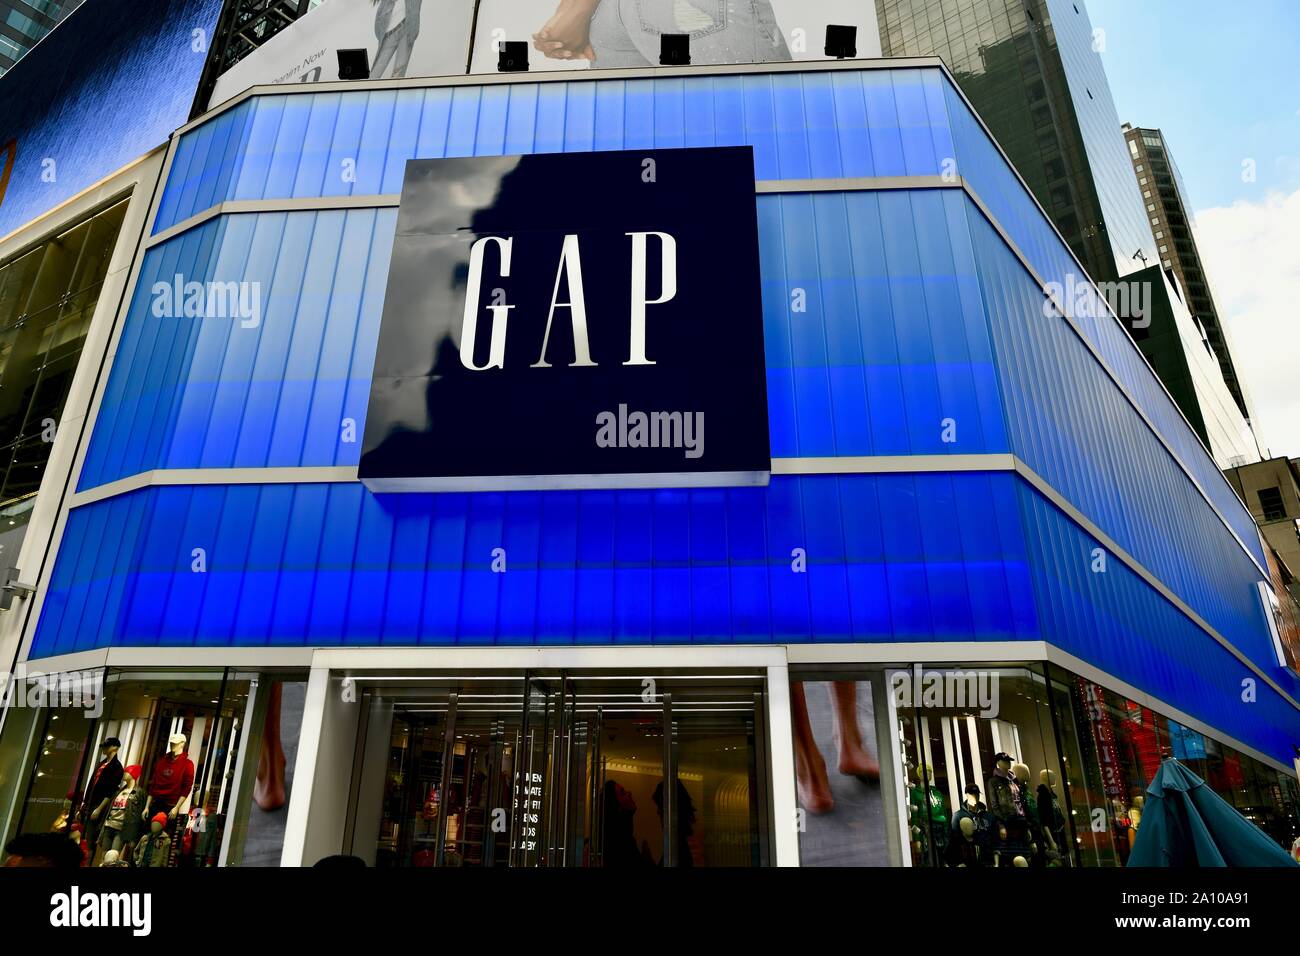 Gap store in Times Square, NYC, USA Stock Photo